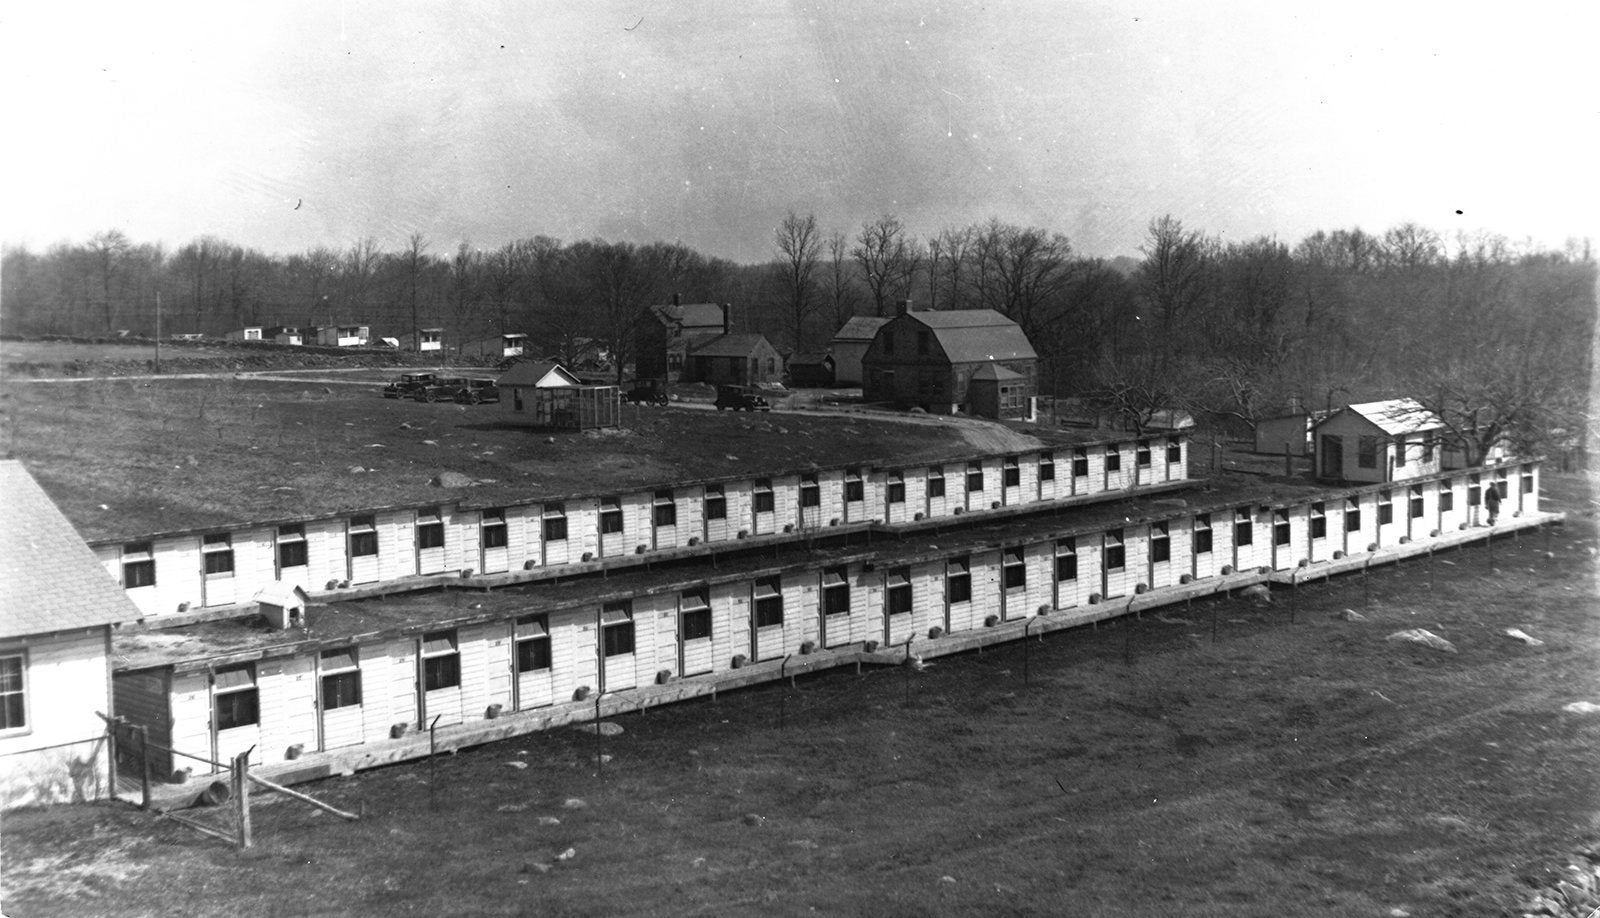 A black and white image showing a long, low building with small uniform sized windows